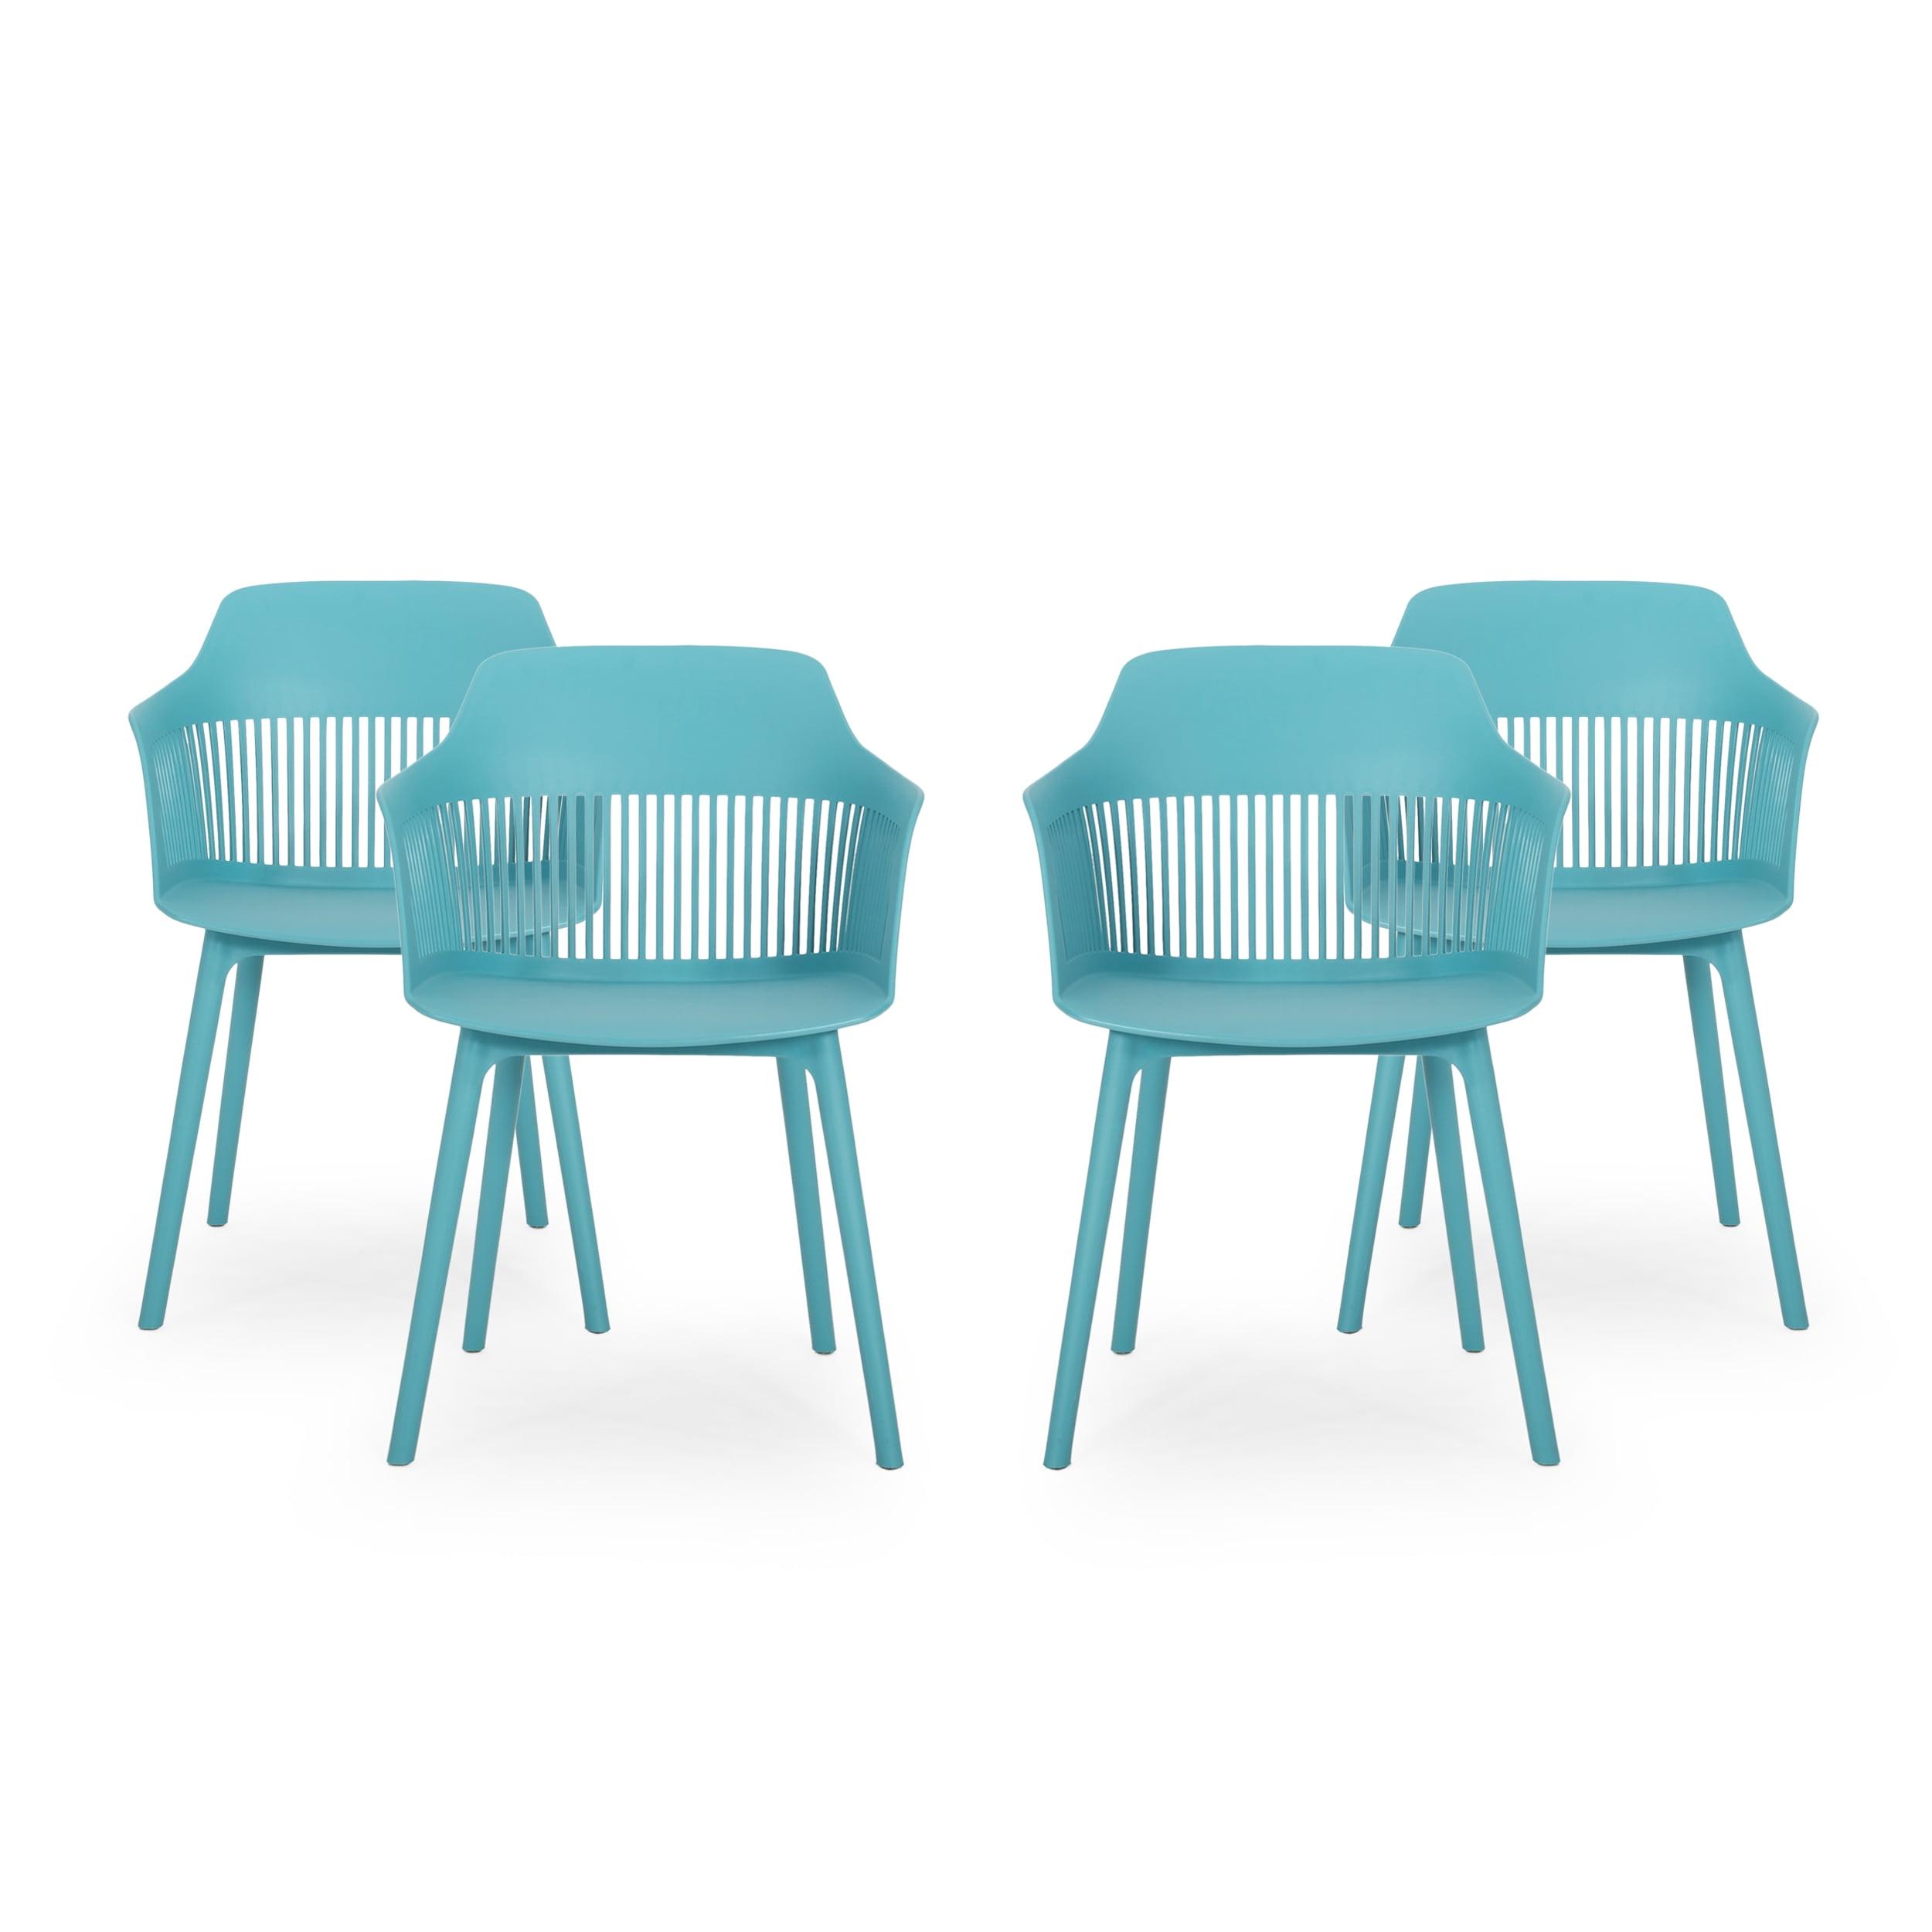 Teal Modern Plastic Outdoor Dining Chair Set of 4